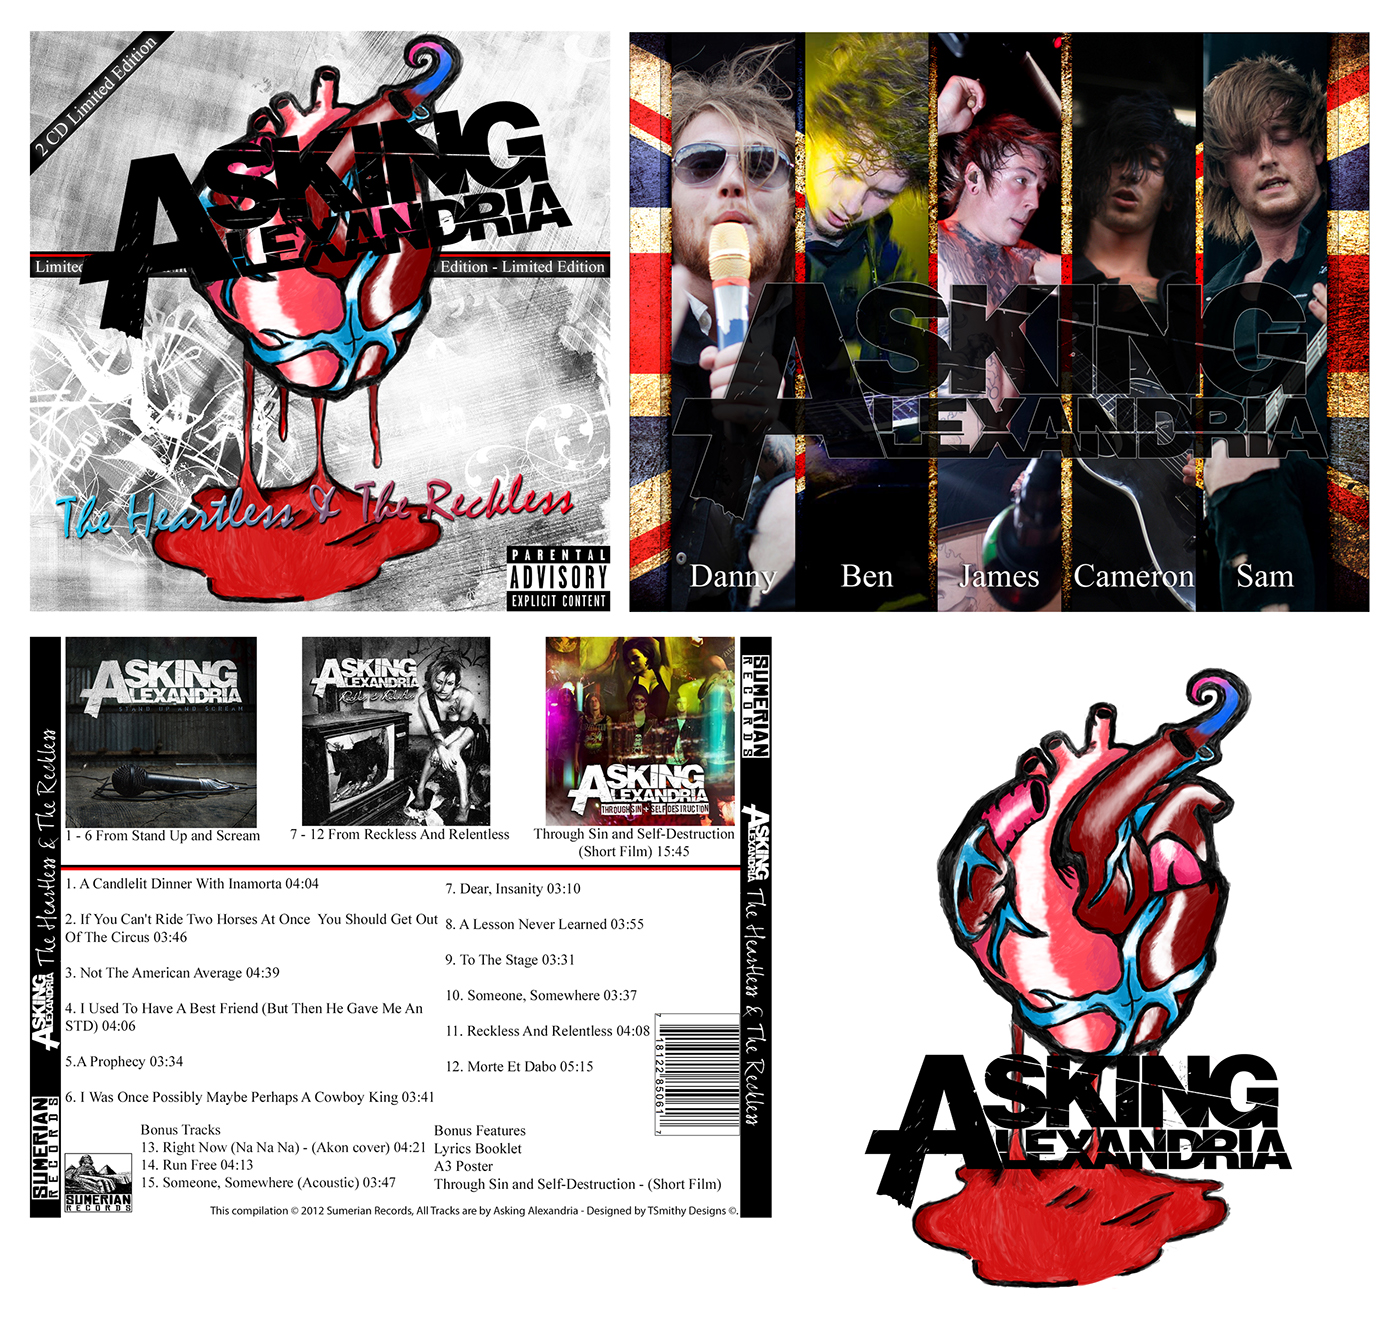 Digital drawing's cd heart asking alexandria college brief poster metal limited edition Best of Fun music design hand drawn